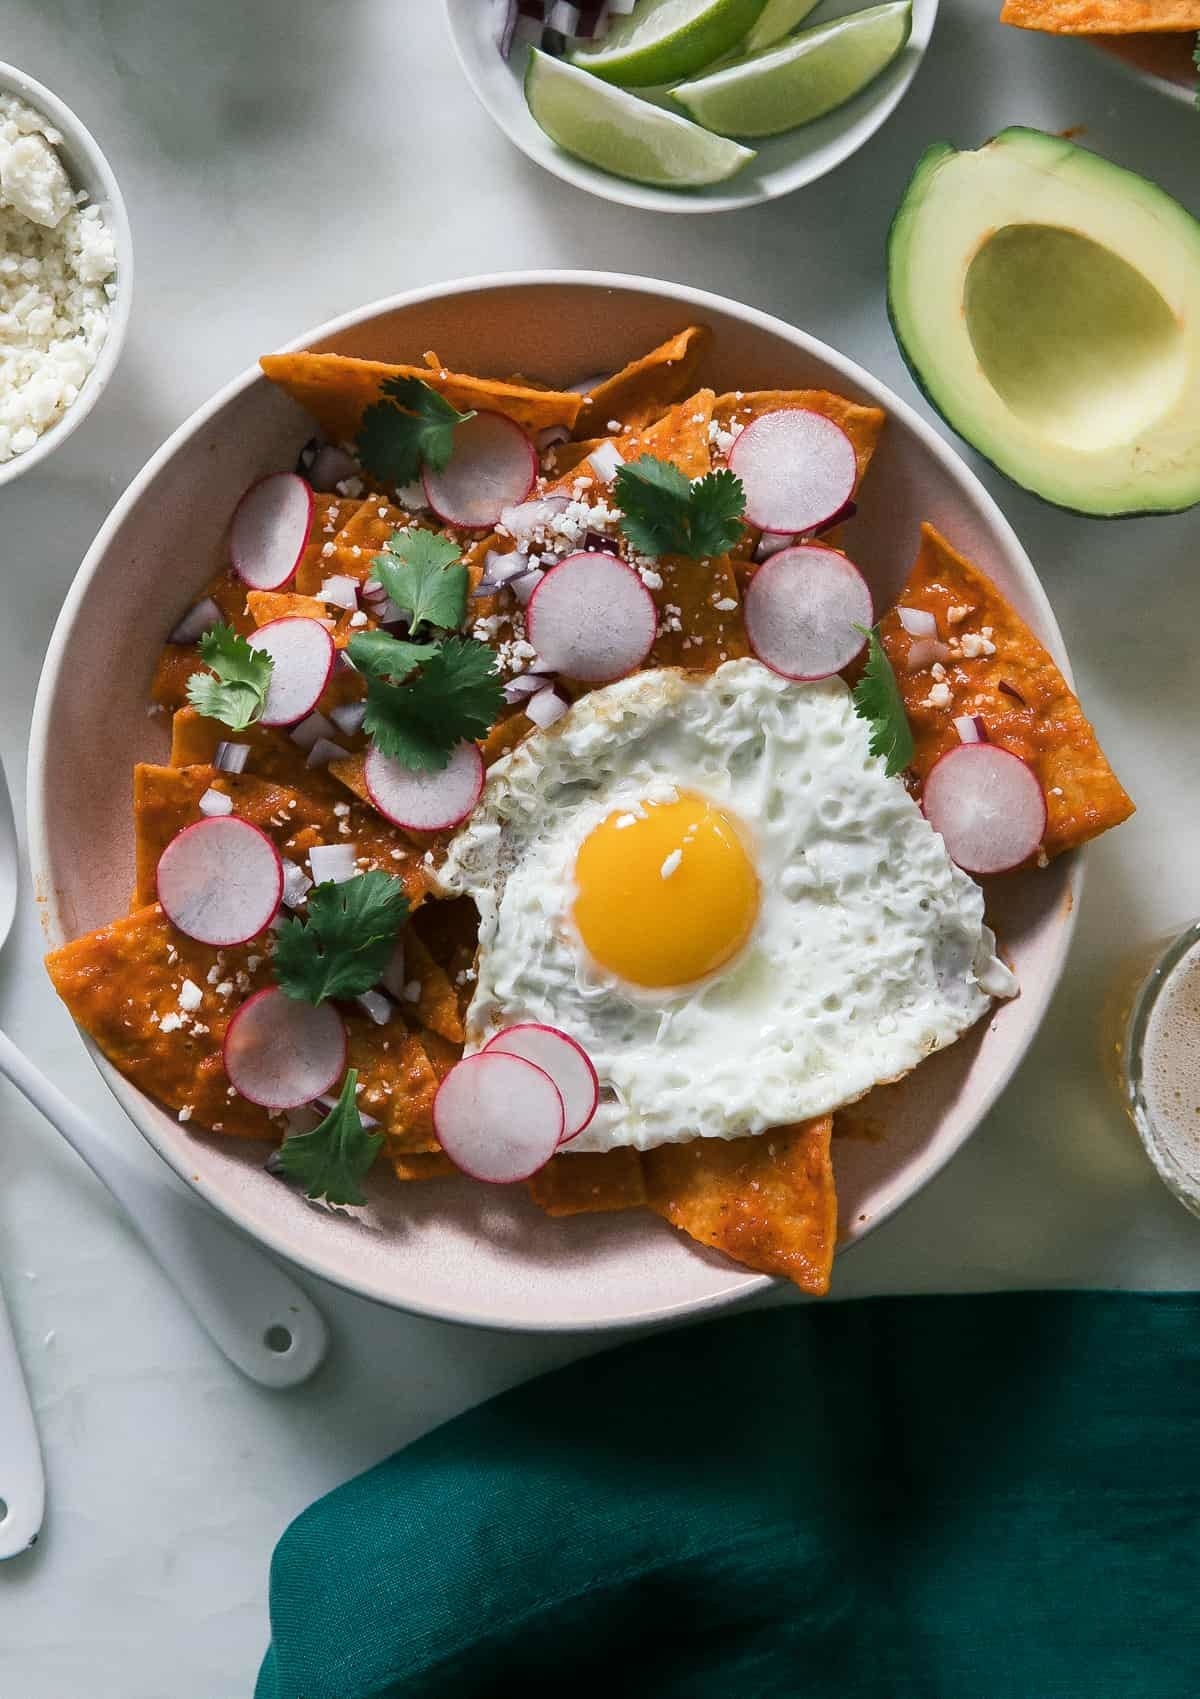 A plate covered in tortilla chips, which were tossed in a tomato sauce, topped with sliced radishes, cilantro, and a fried egg.